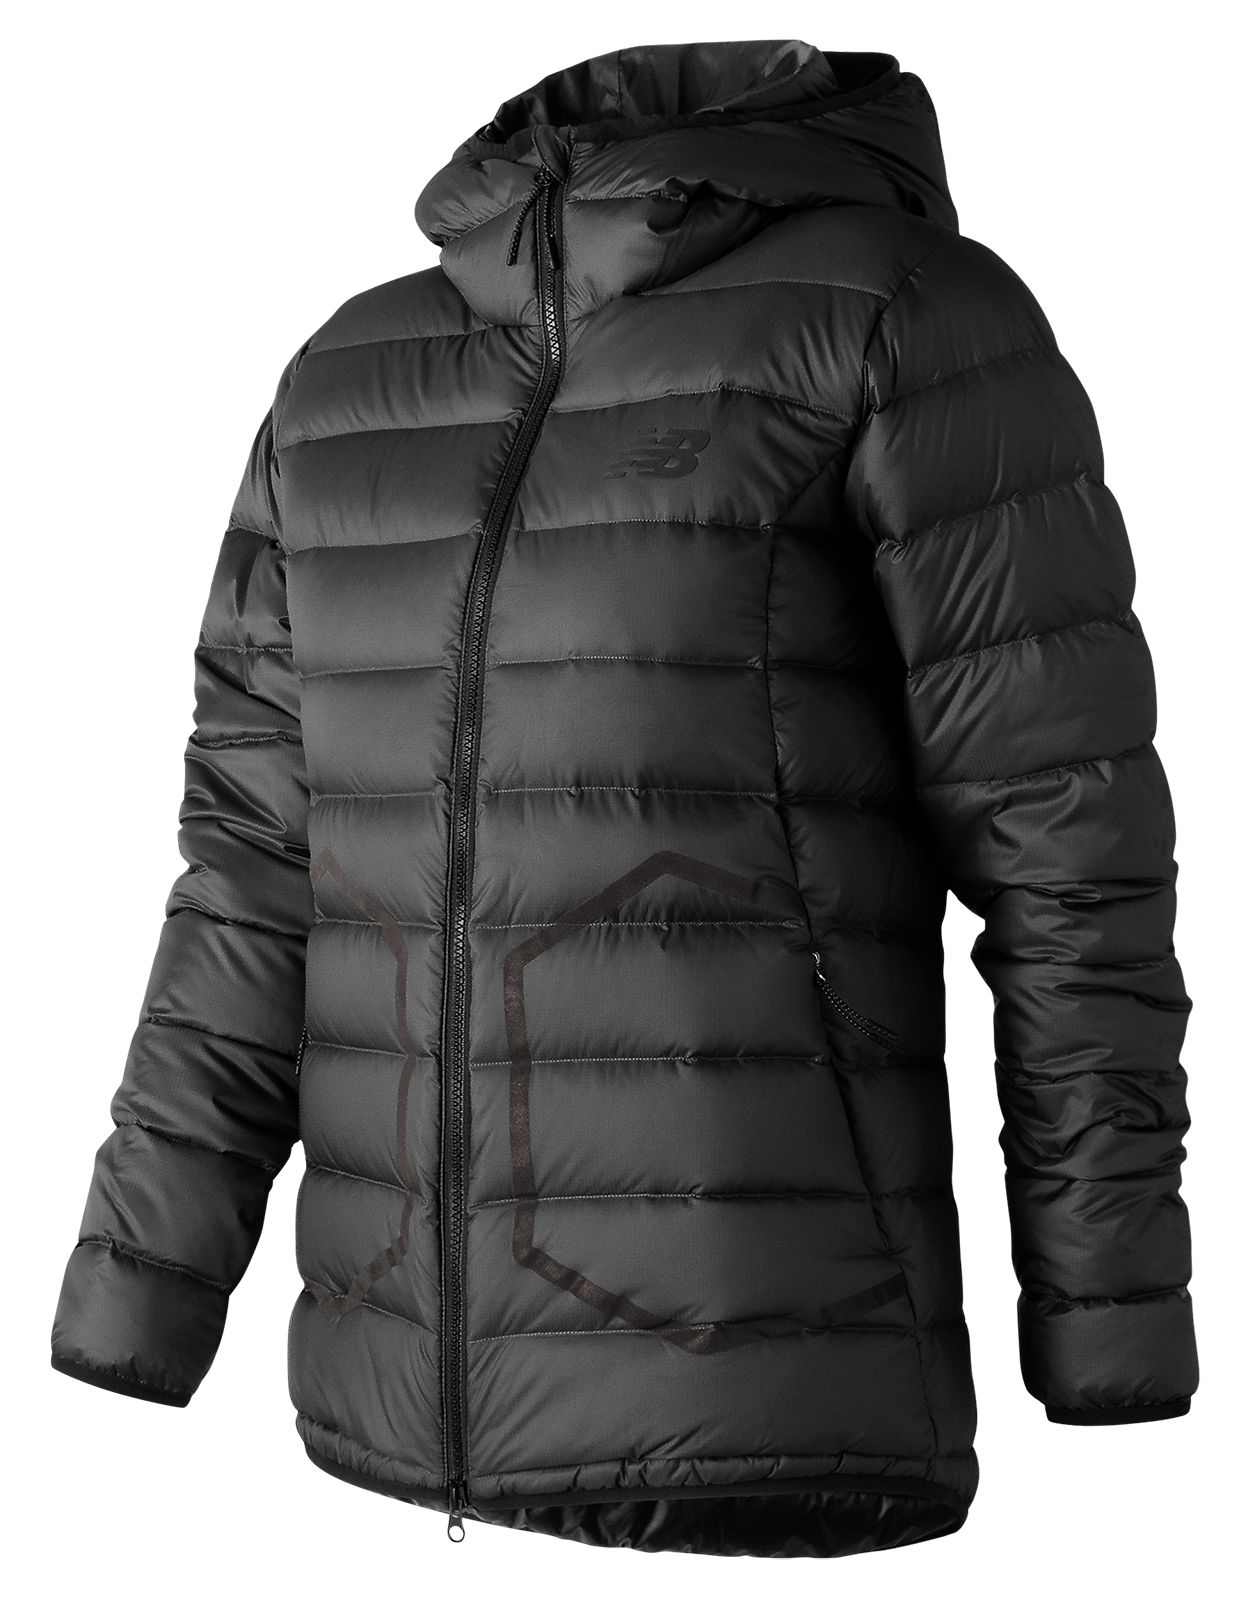 247 Luxe Down Jacket - Women's 73548 - Jackets, Lifestyle - New Balance